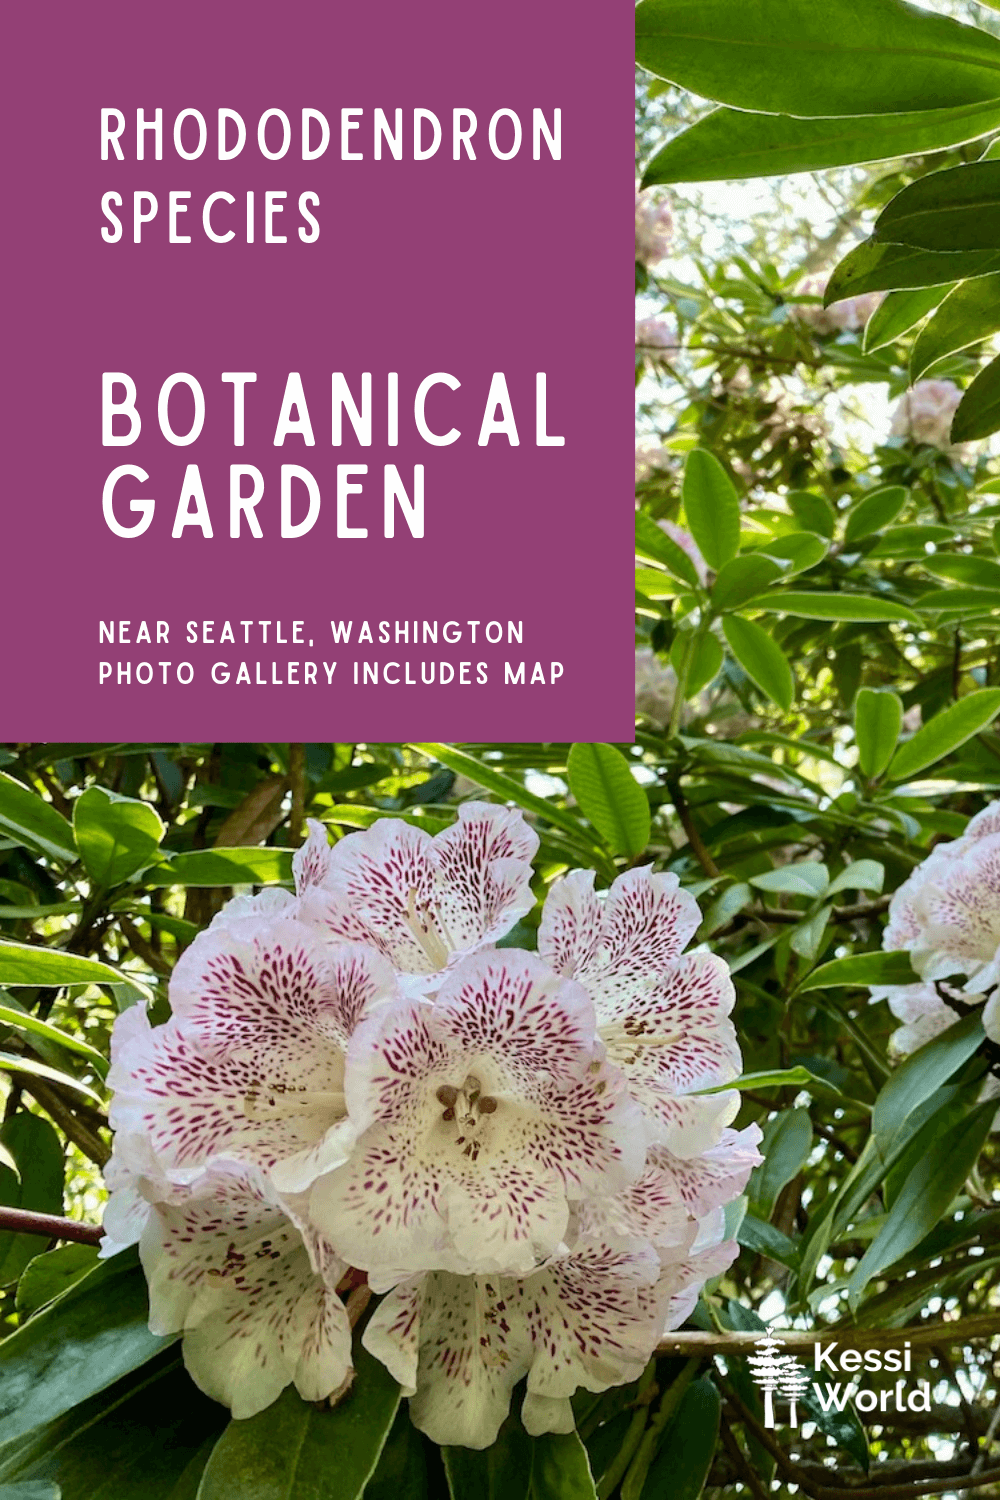 This Pinterest pin highlights the colorful blooms featured at the Rhododendron Species Botanical Garden, near Seattle, Washington.  These flowers fan out with an intricate purple pattern against the white blooms on thick branches with waxy green leaves.  